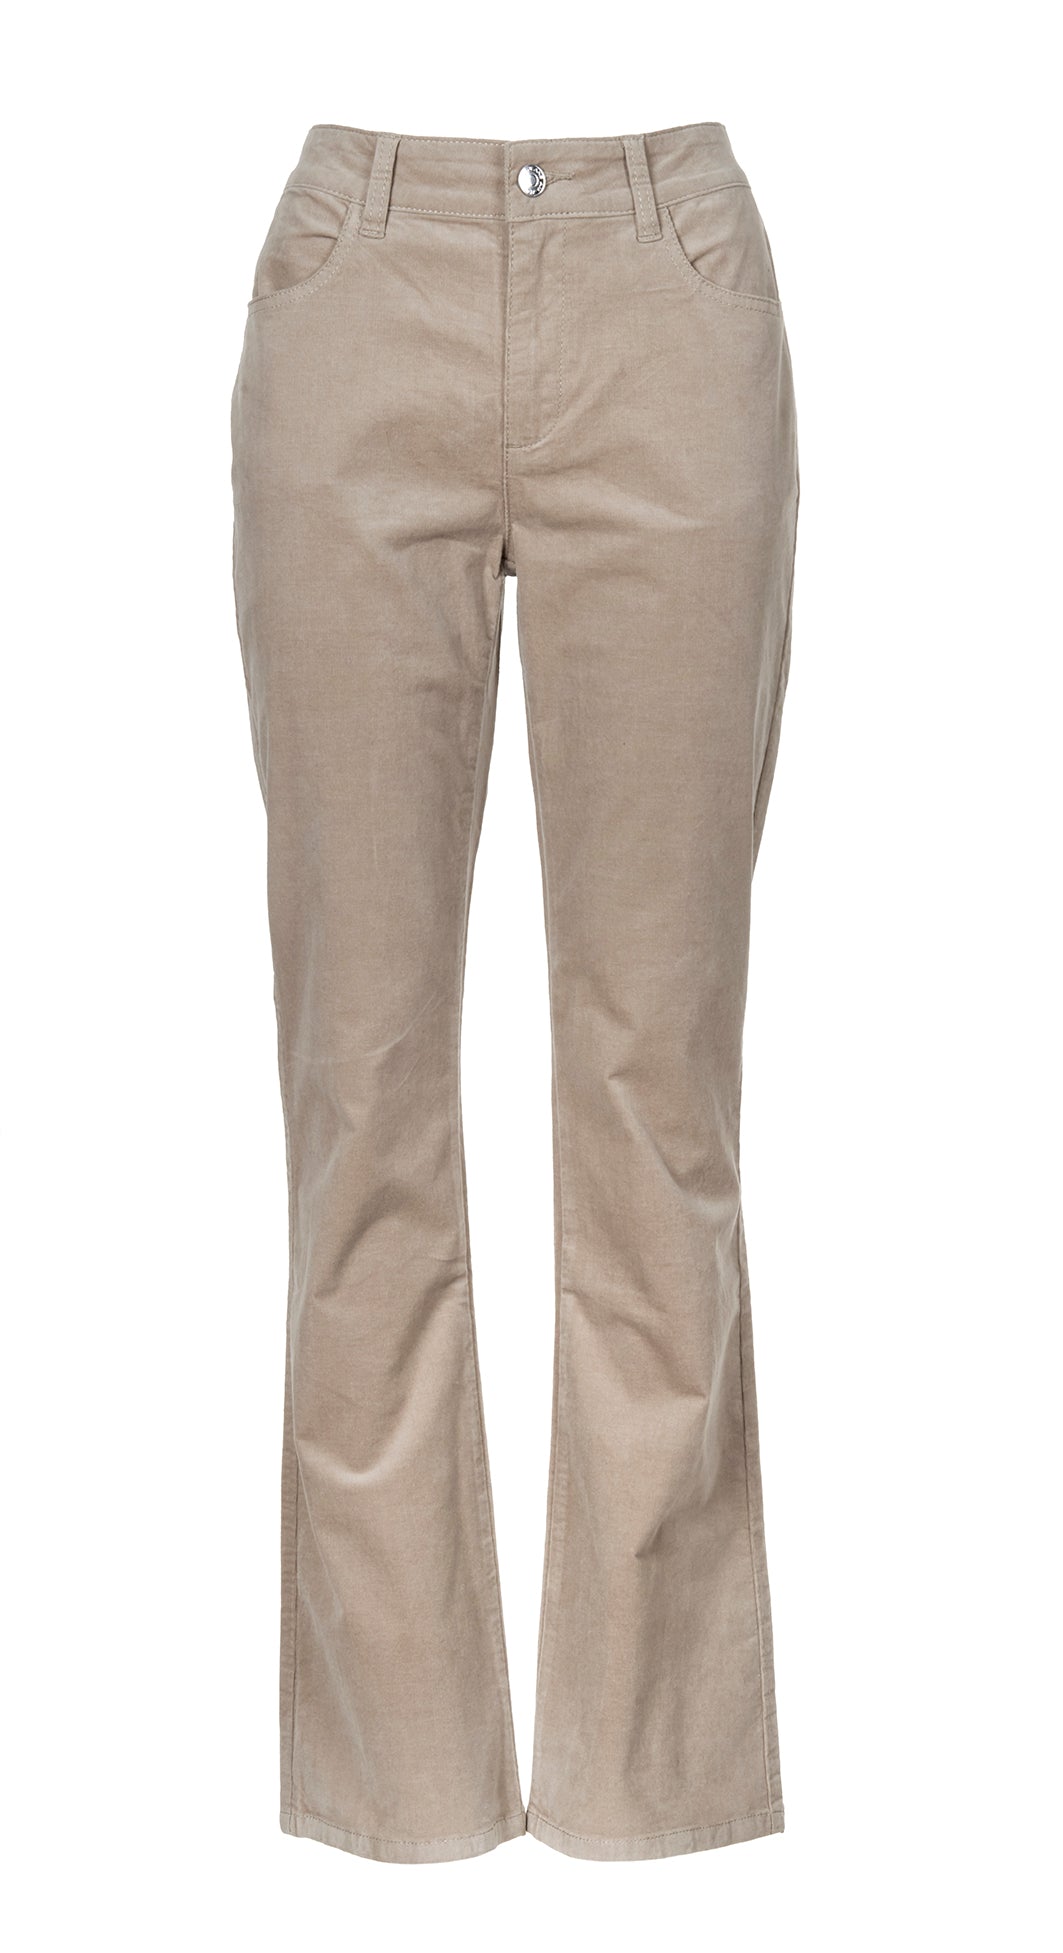 Ane Mone Lily Trouser Beige